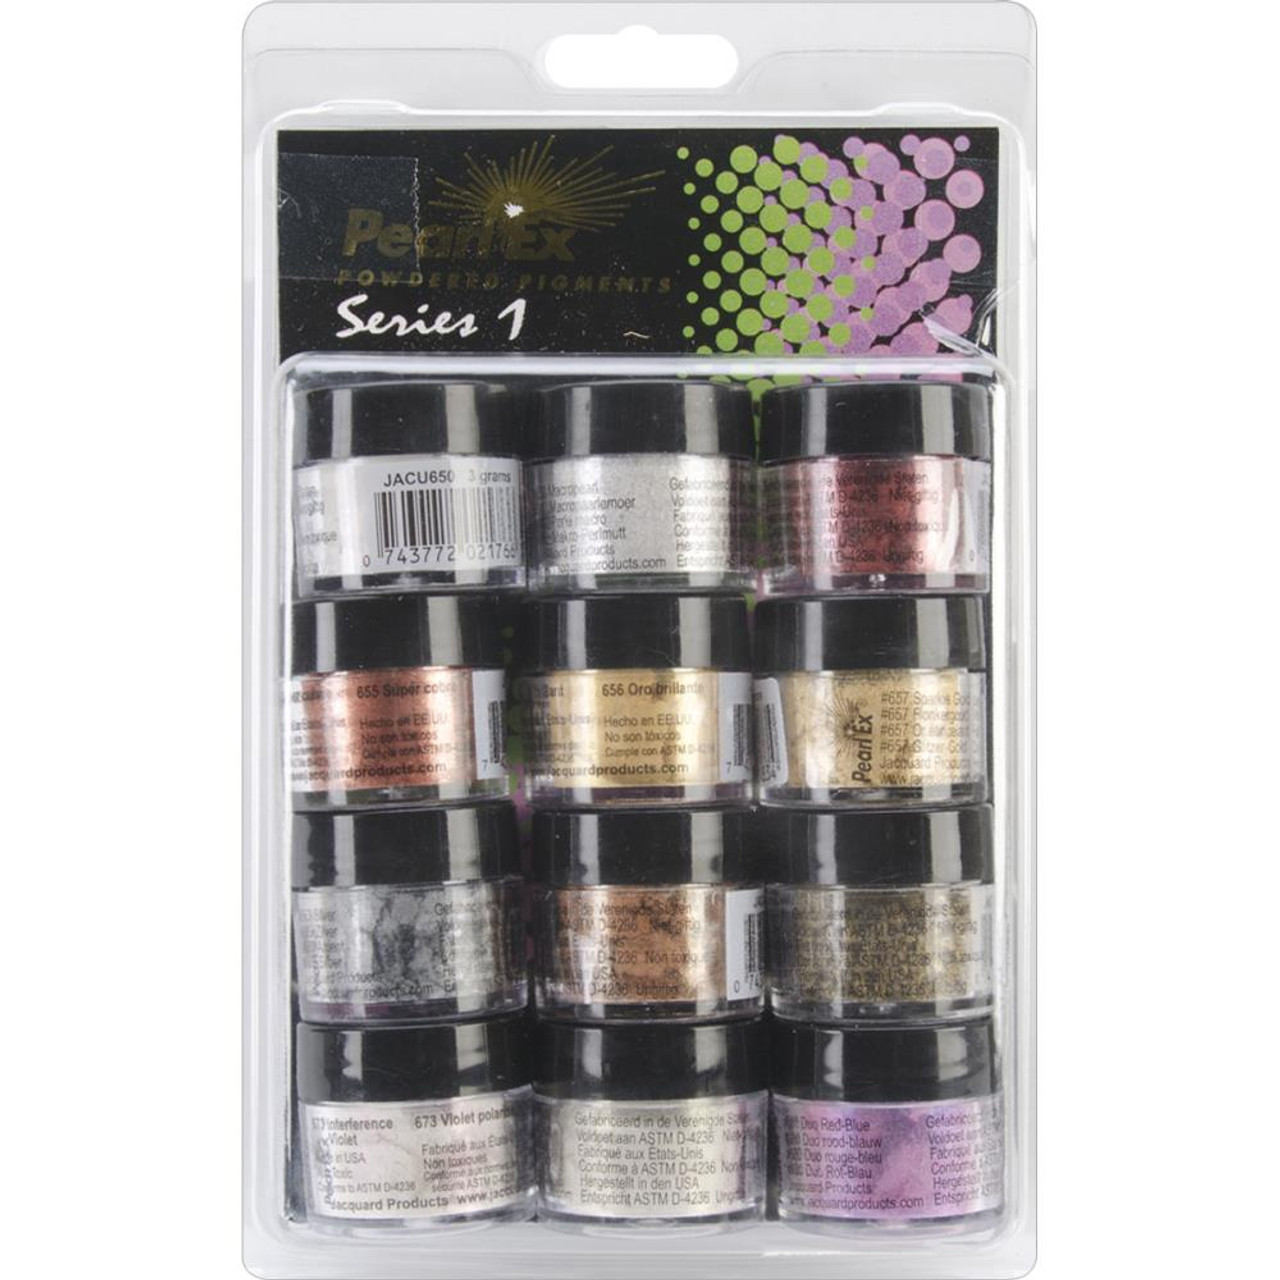 Jacquard Series 1 Pearl Ex Powdered Pigments 3g 12/Pkg - Poly Clay Play